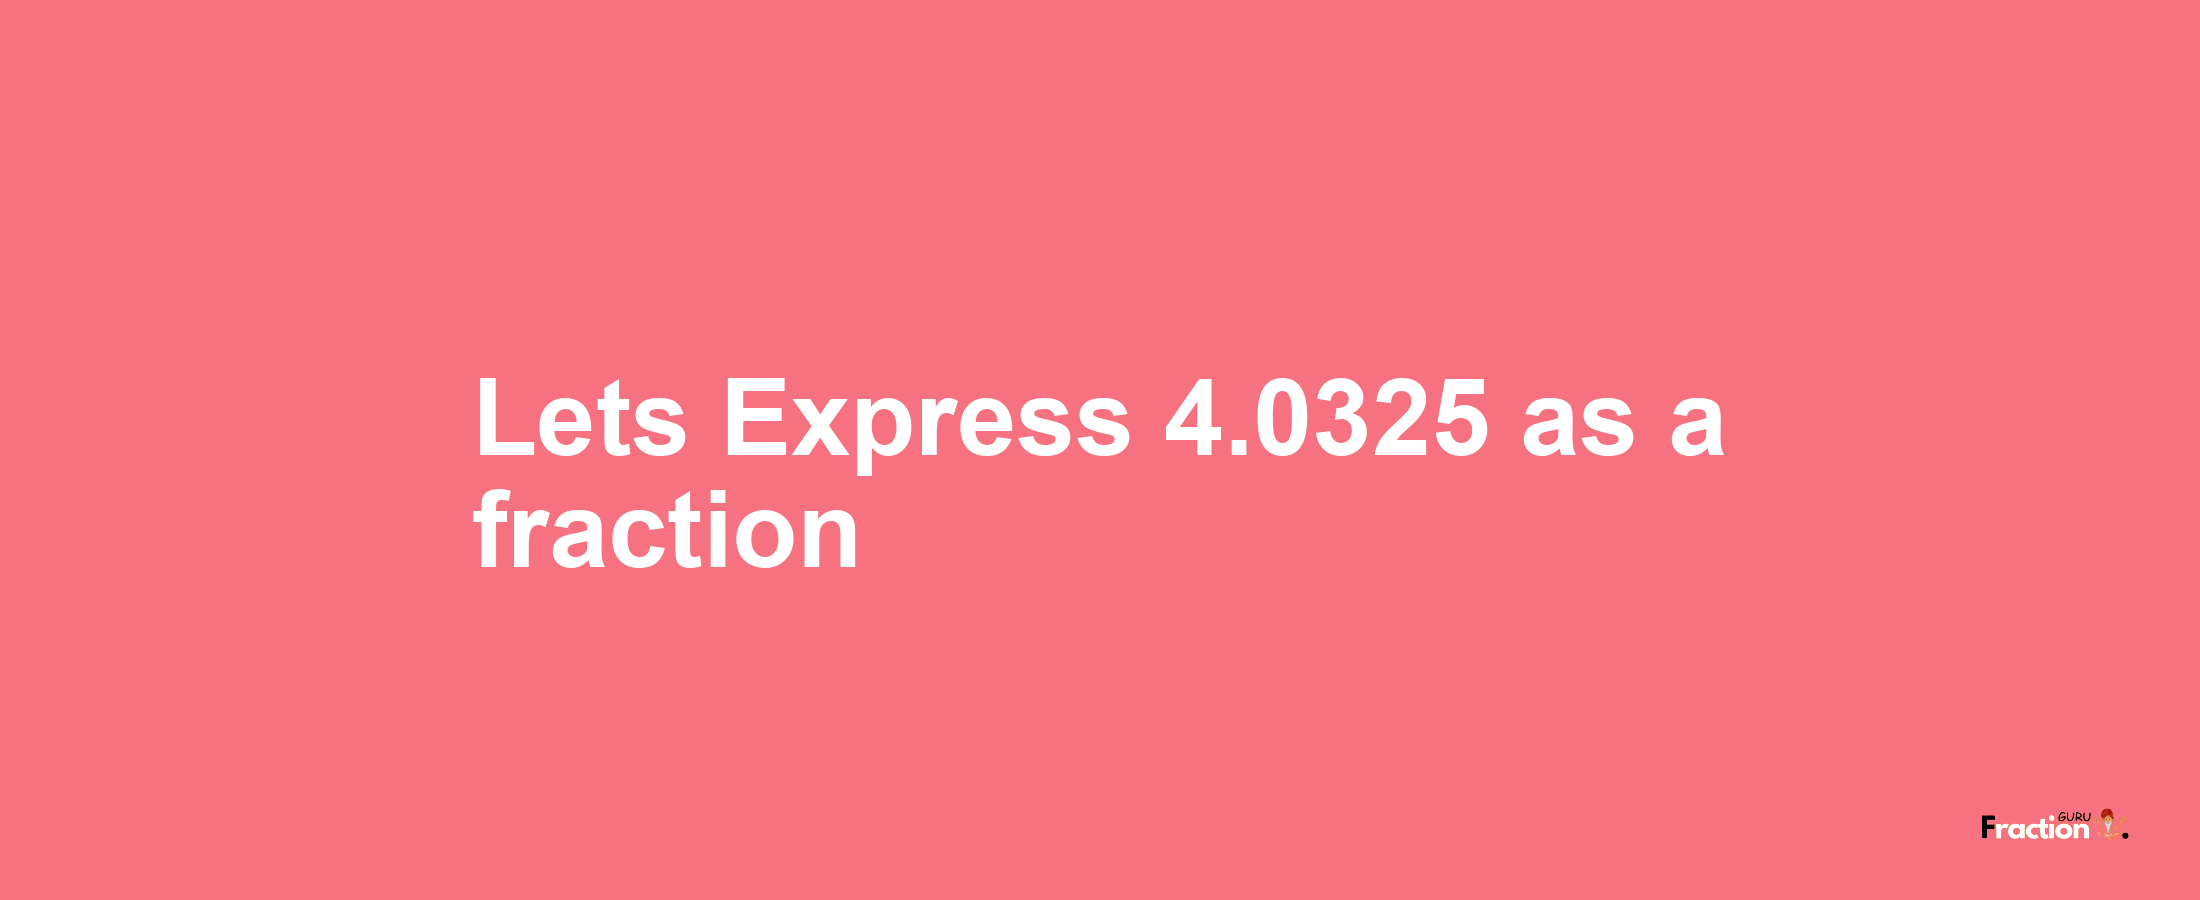 Lets Express 4.0325 as afraction